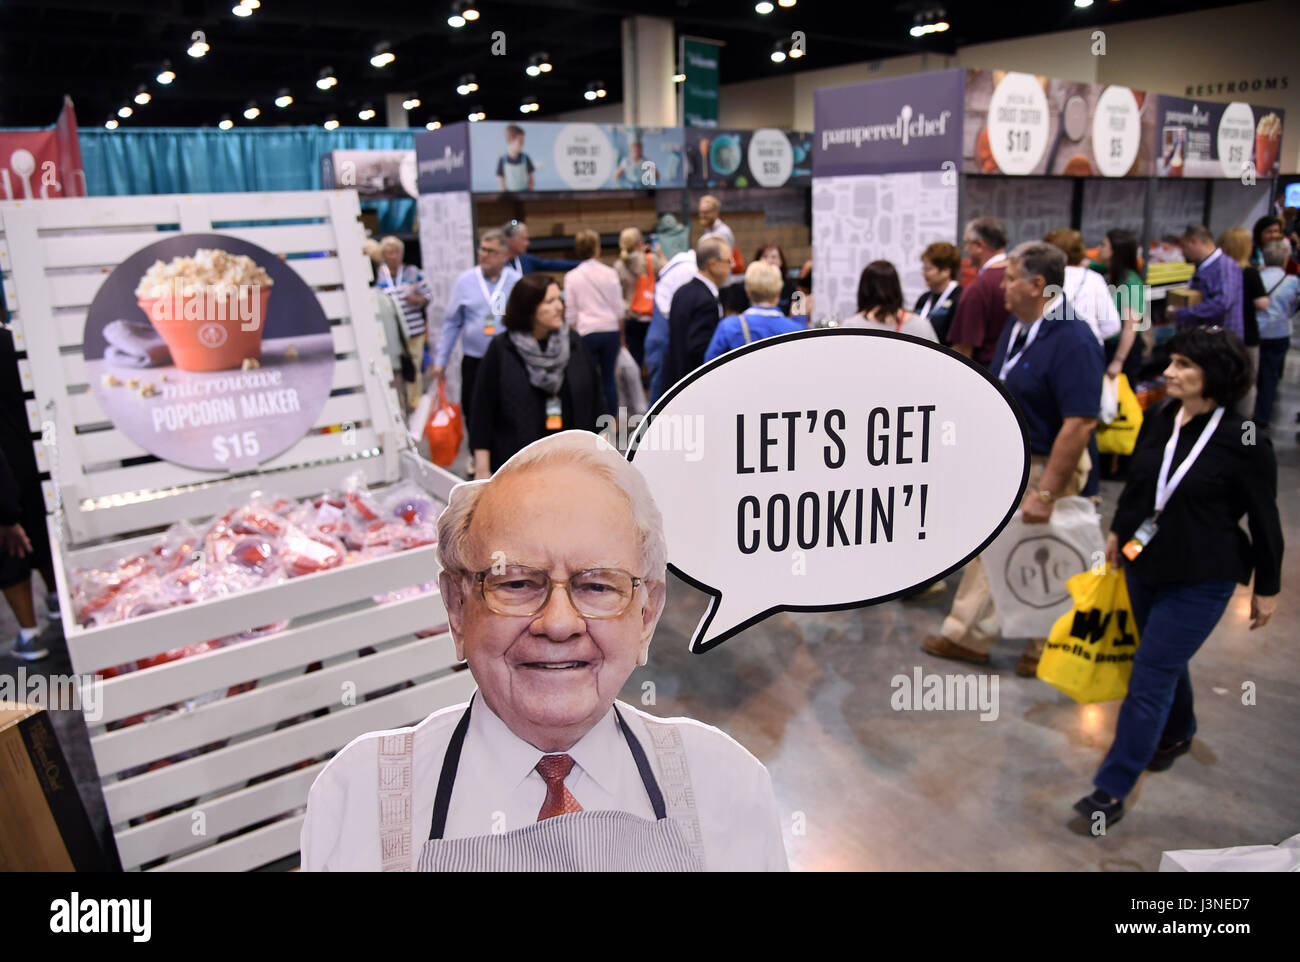 Omaha, USA. 5th May, 2017. Shareholders view an exhibition of goods which are produced by companies invested by Warren Buffett's Berkshire Hathaway during the Annual Meeting in Omaha, Nebraska, the United States, May 5, 2017. The event attracts more than 40,000 shareholders from around the world as well as a wide variety of media outlets to Omaha every year. Credit: Yin Bogu/Xinhua/Alamy Live News Stock Photo